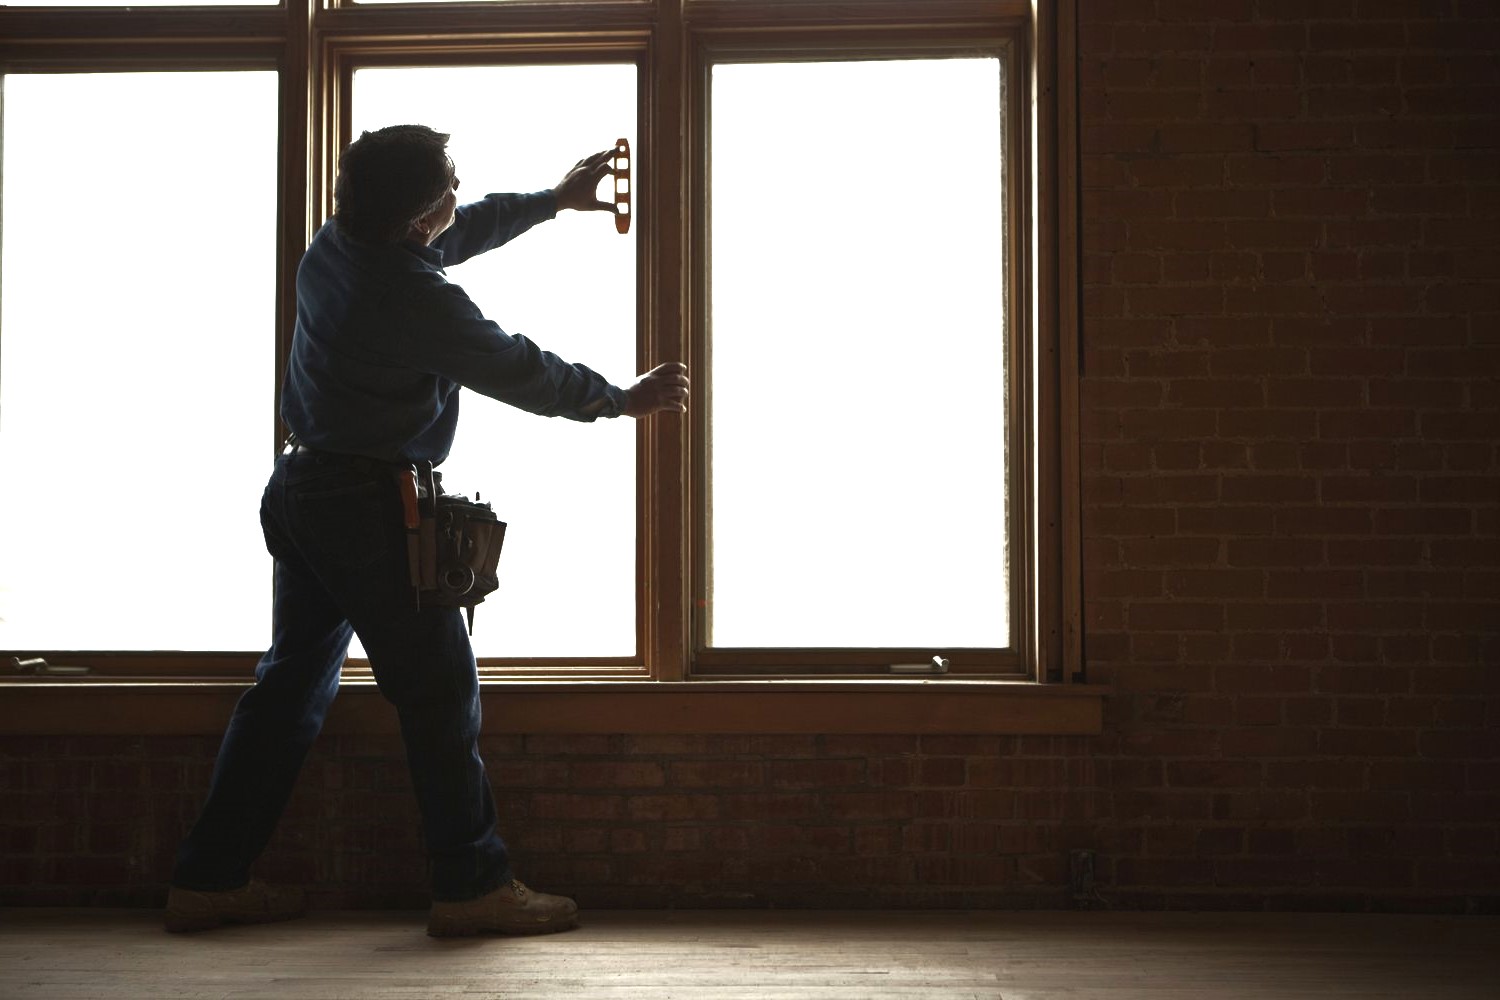 Choosing Vinyl Windows: A Guide to Finding the Best Windows for Your Home